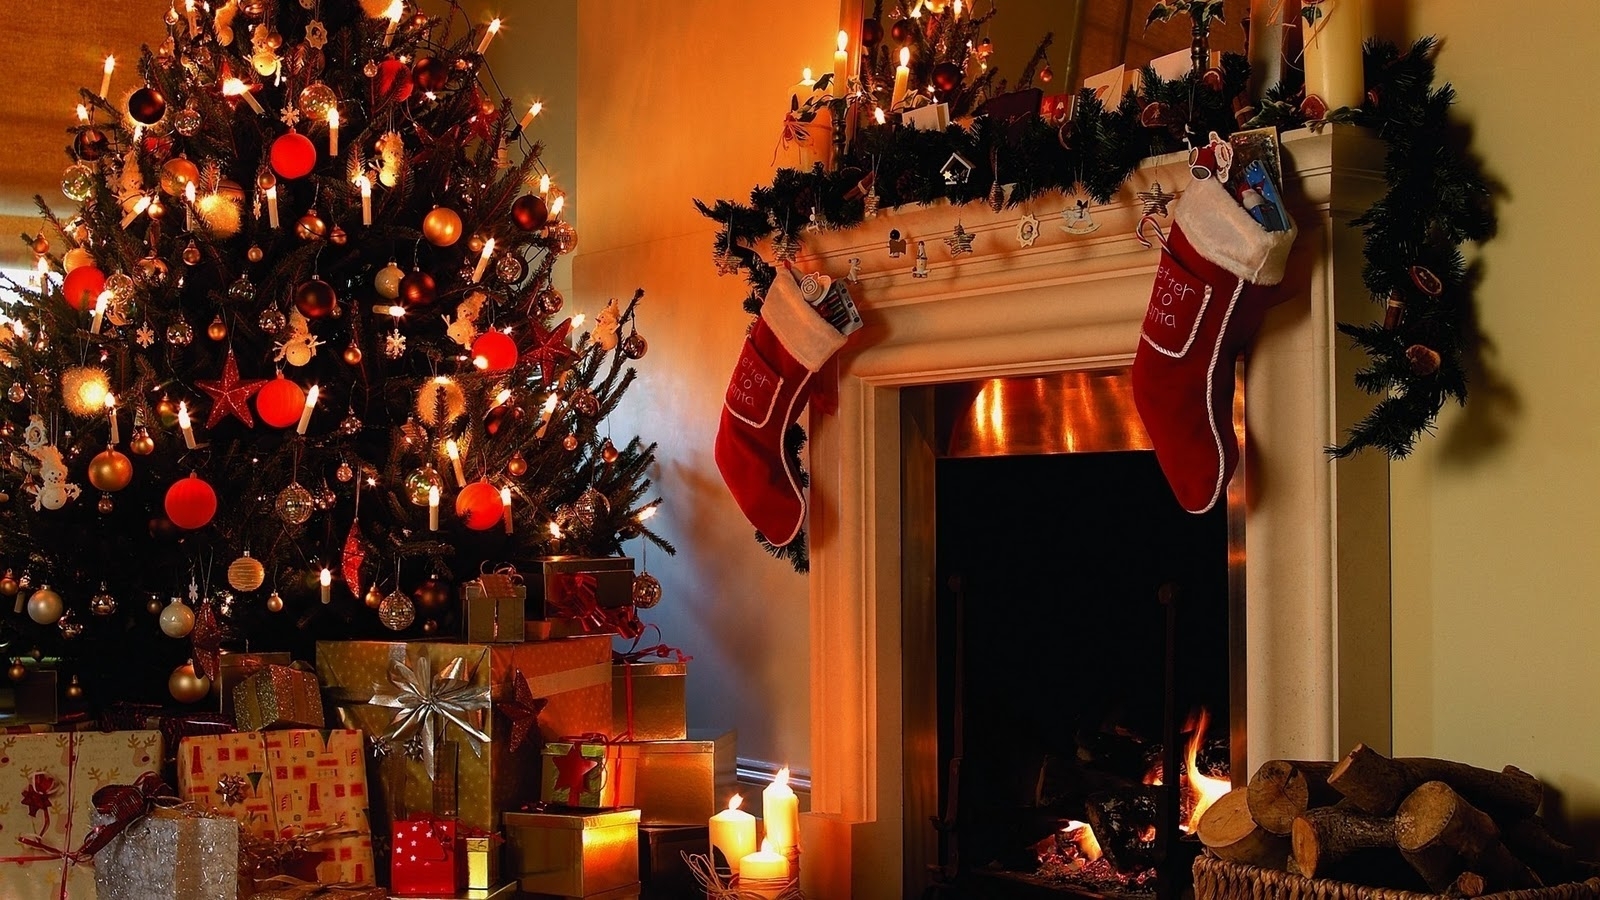 irbob sevenfold: christmas tree and fireplace wallpaper